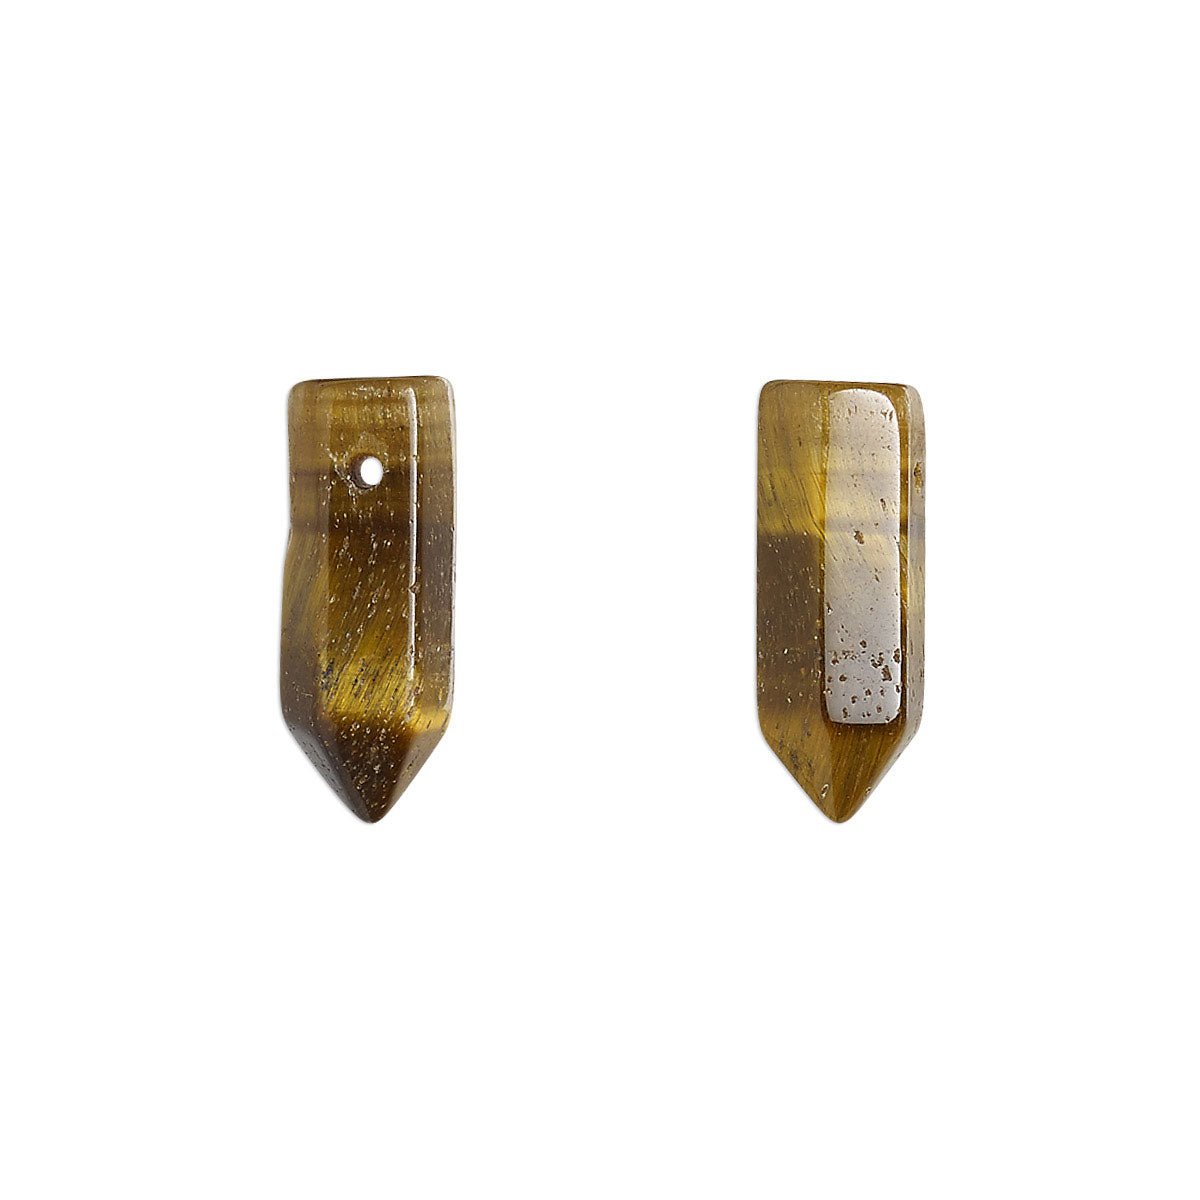 Tigers Eye Point Bead 16mm - 13 Moons